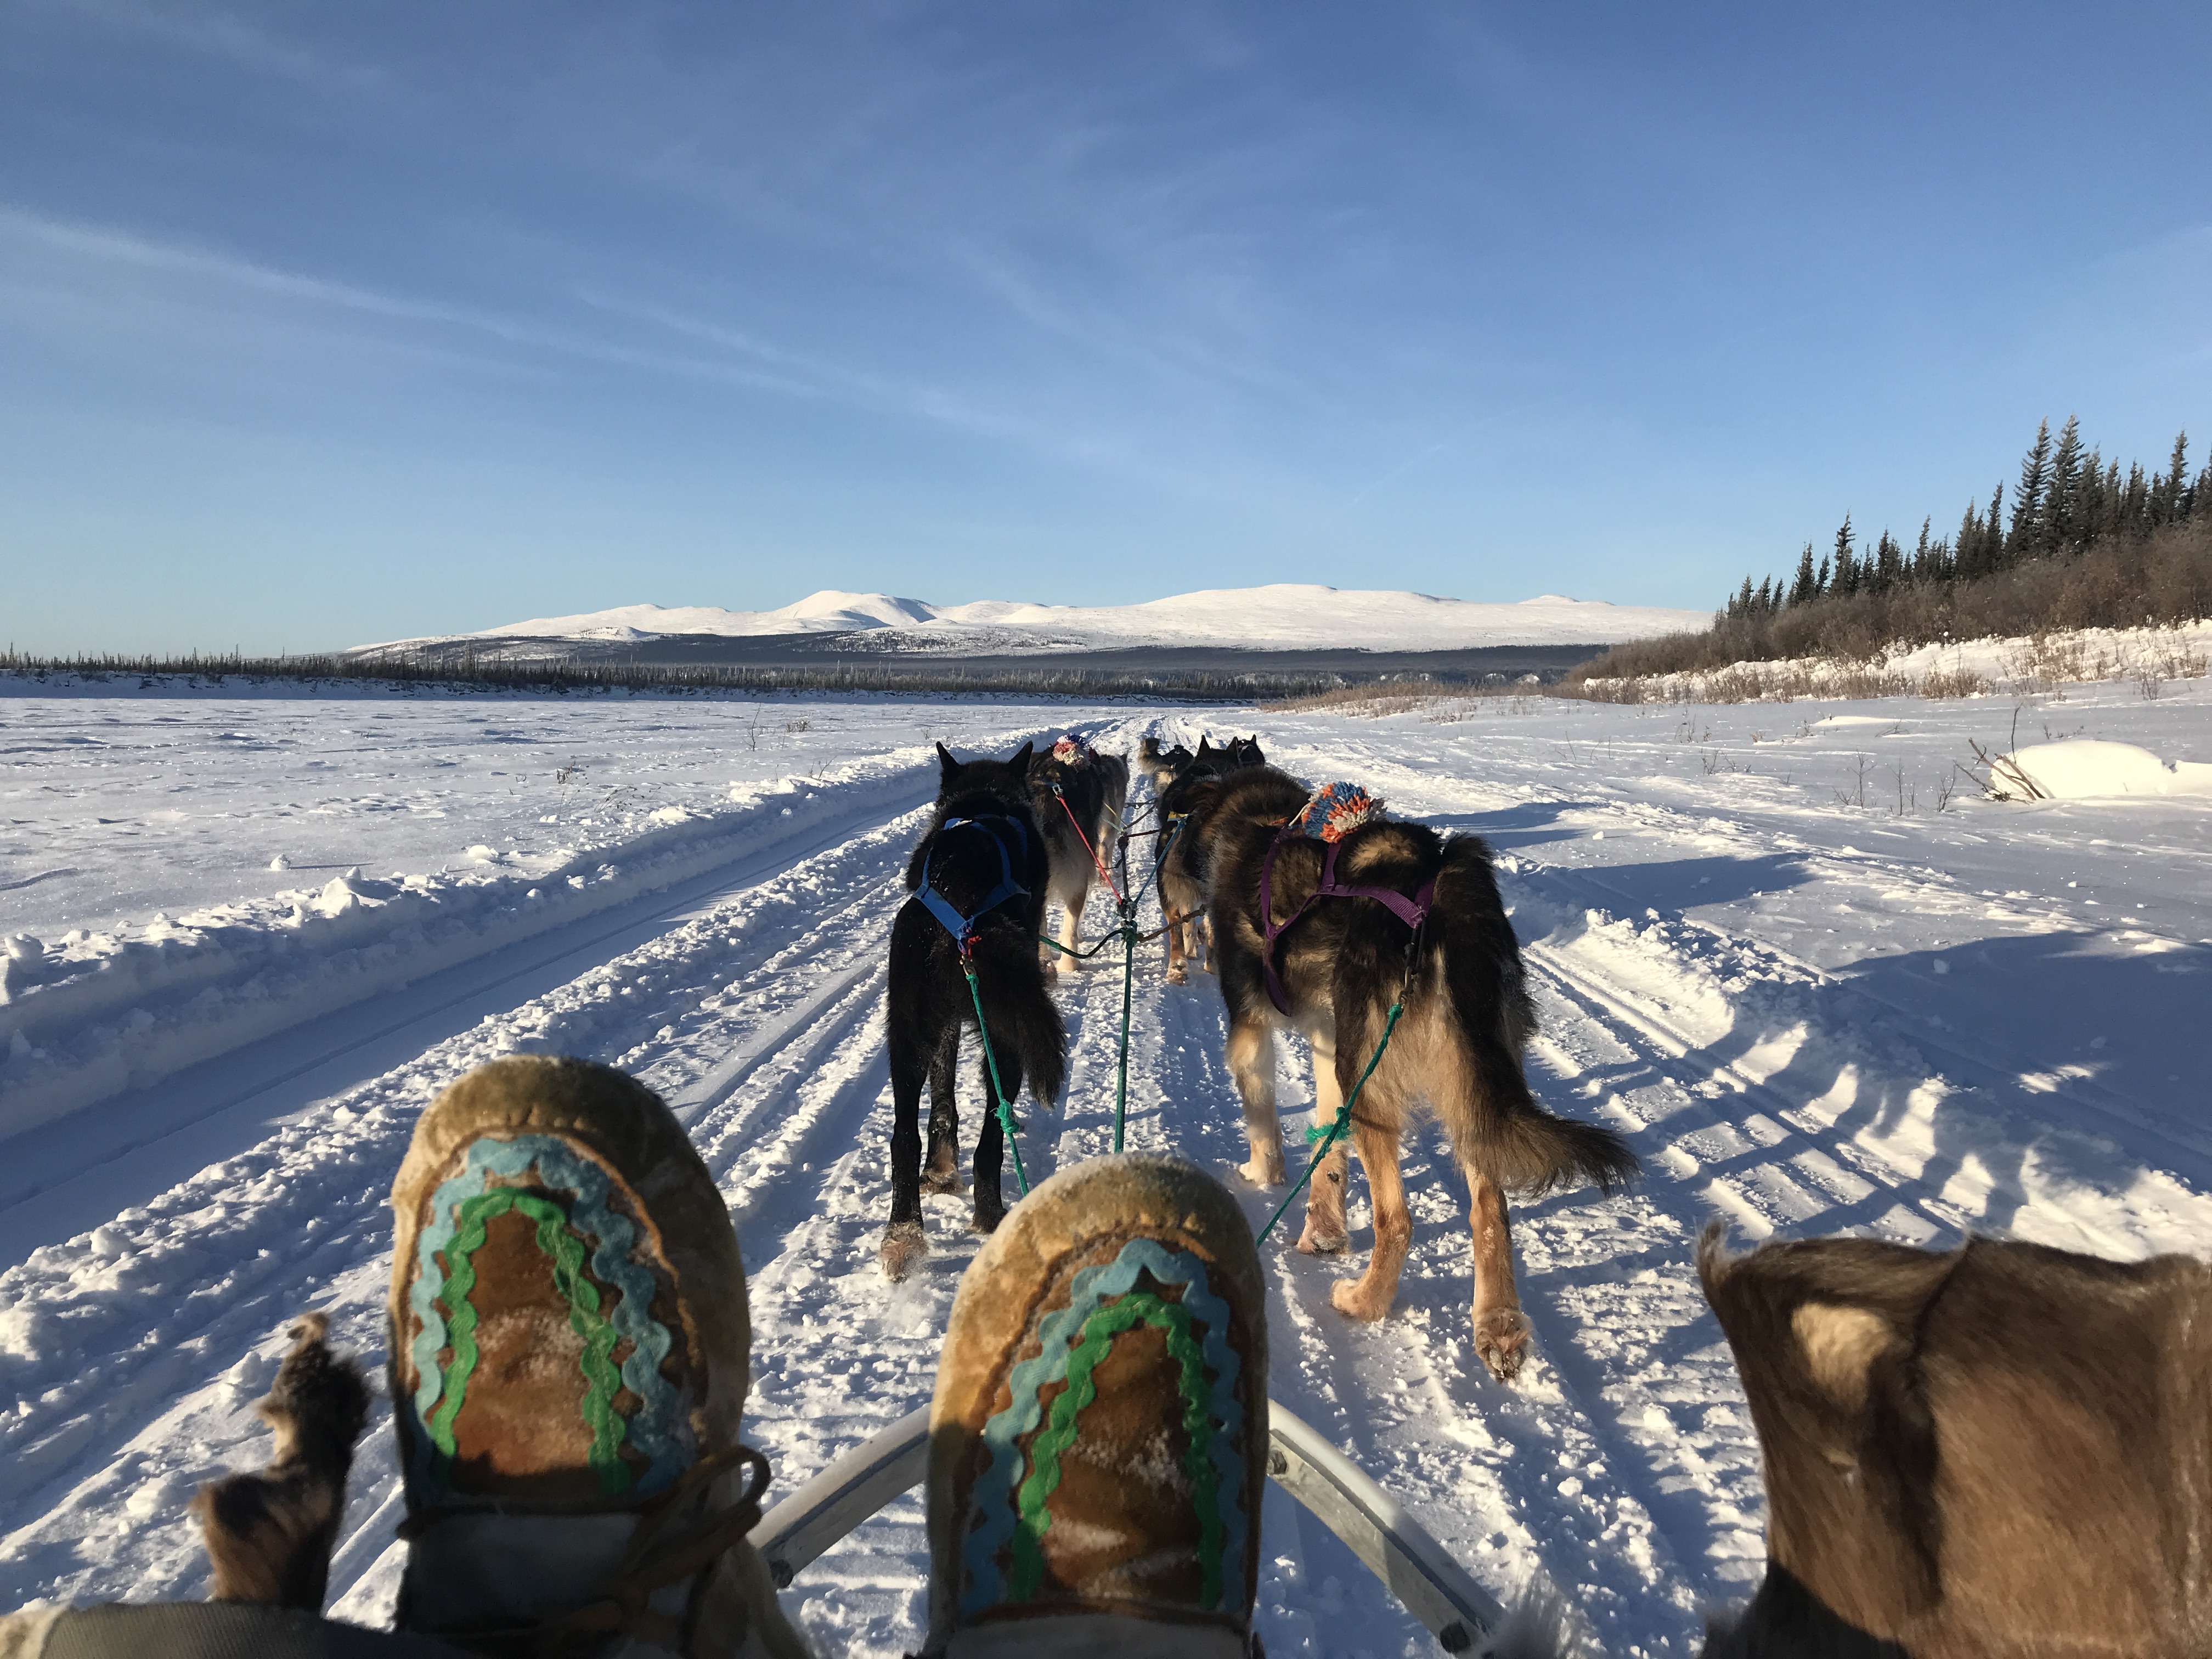 Dog-mushing in more temperate weather. Photo by Paul Josie